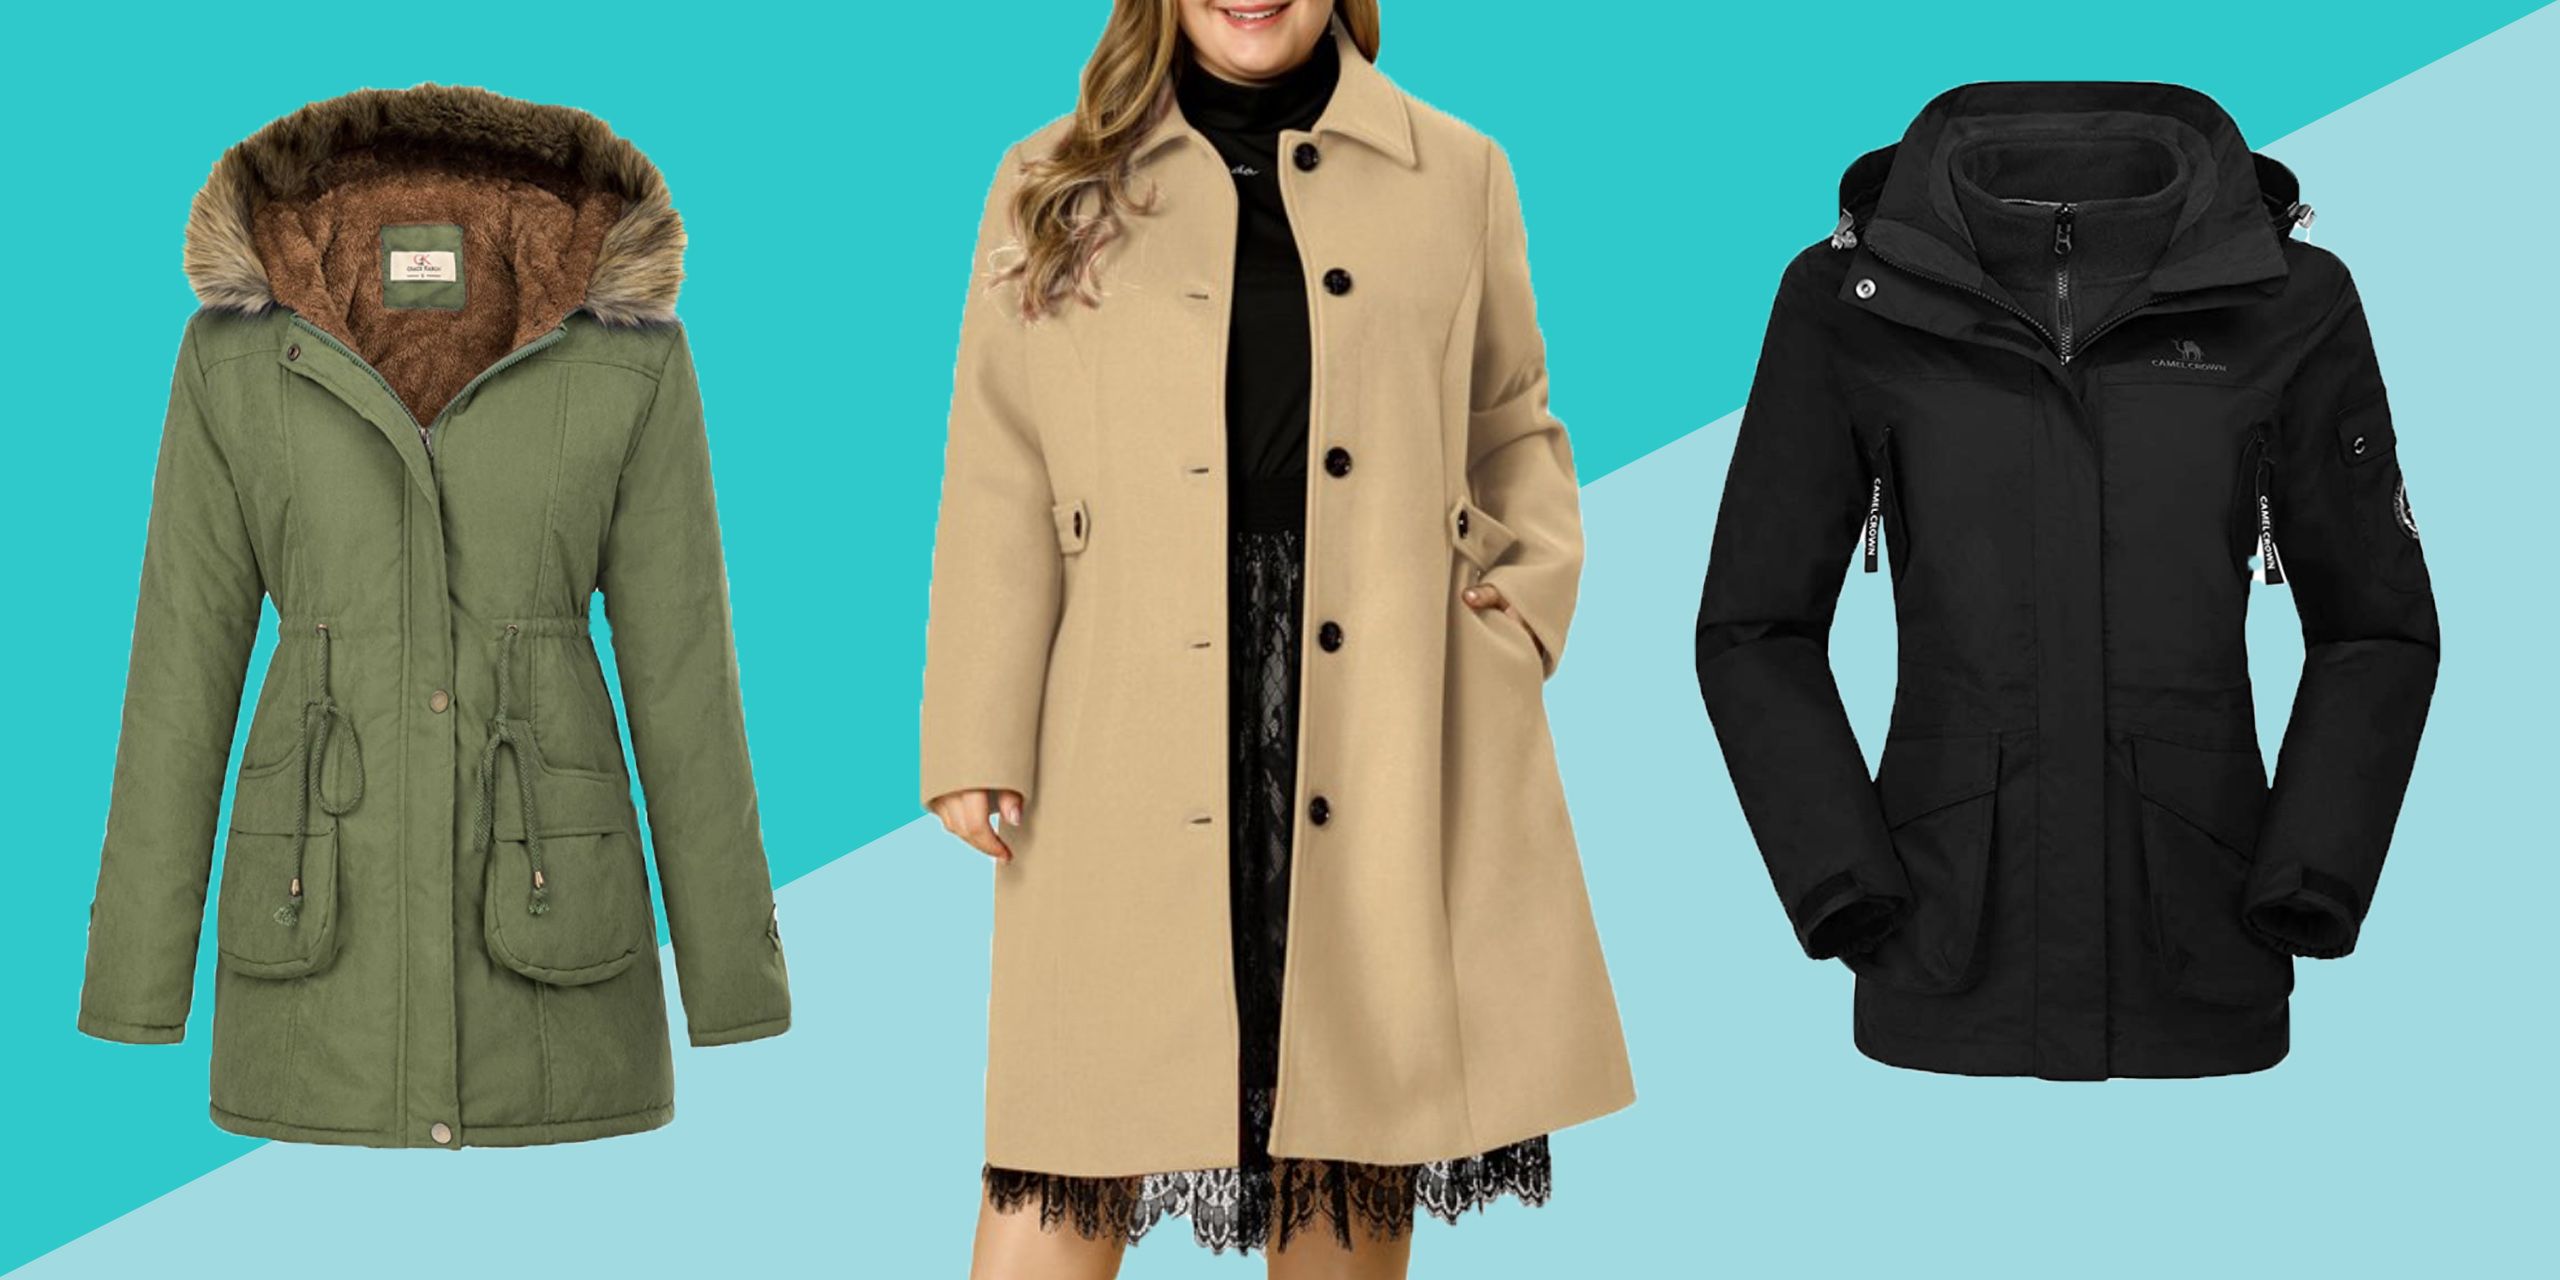 Womens Plush Winter Coats Plus Size Button Down Jackets Long Sleeve Lapels Tops Outwear with Pockets 